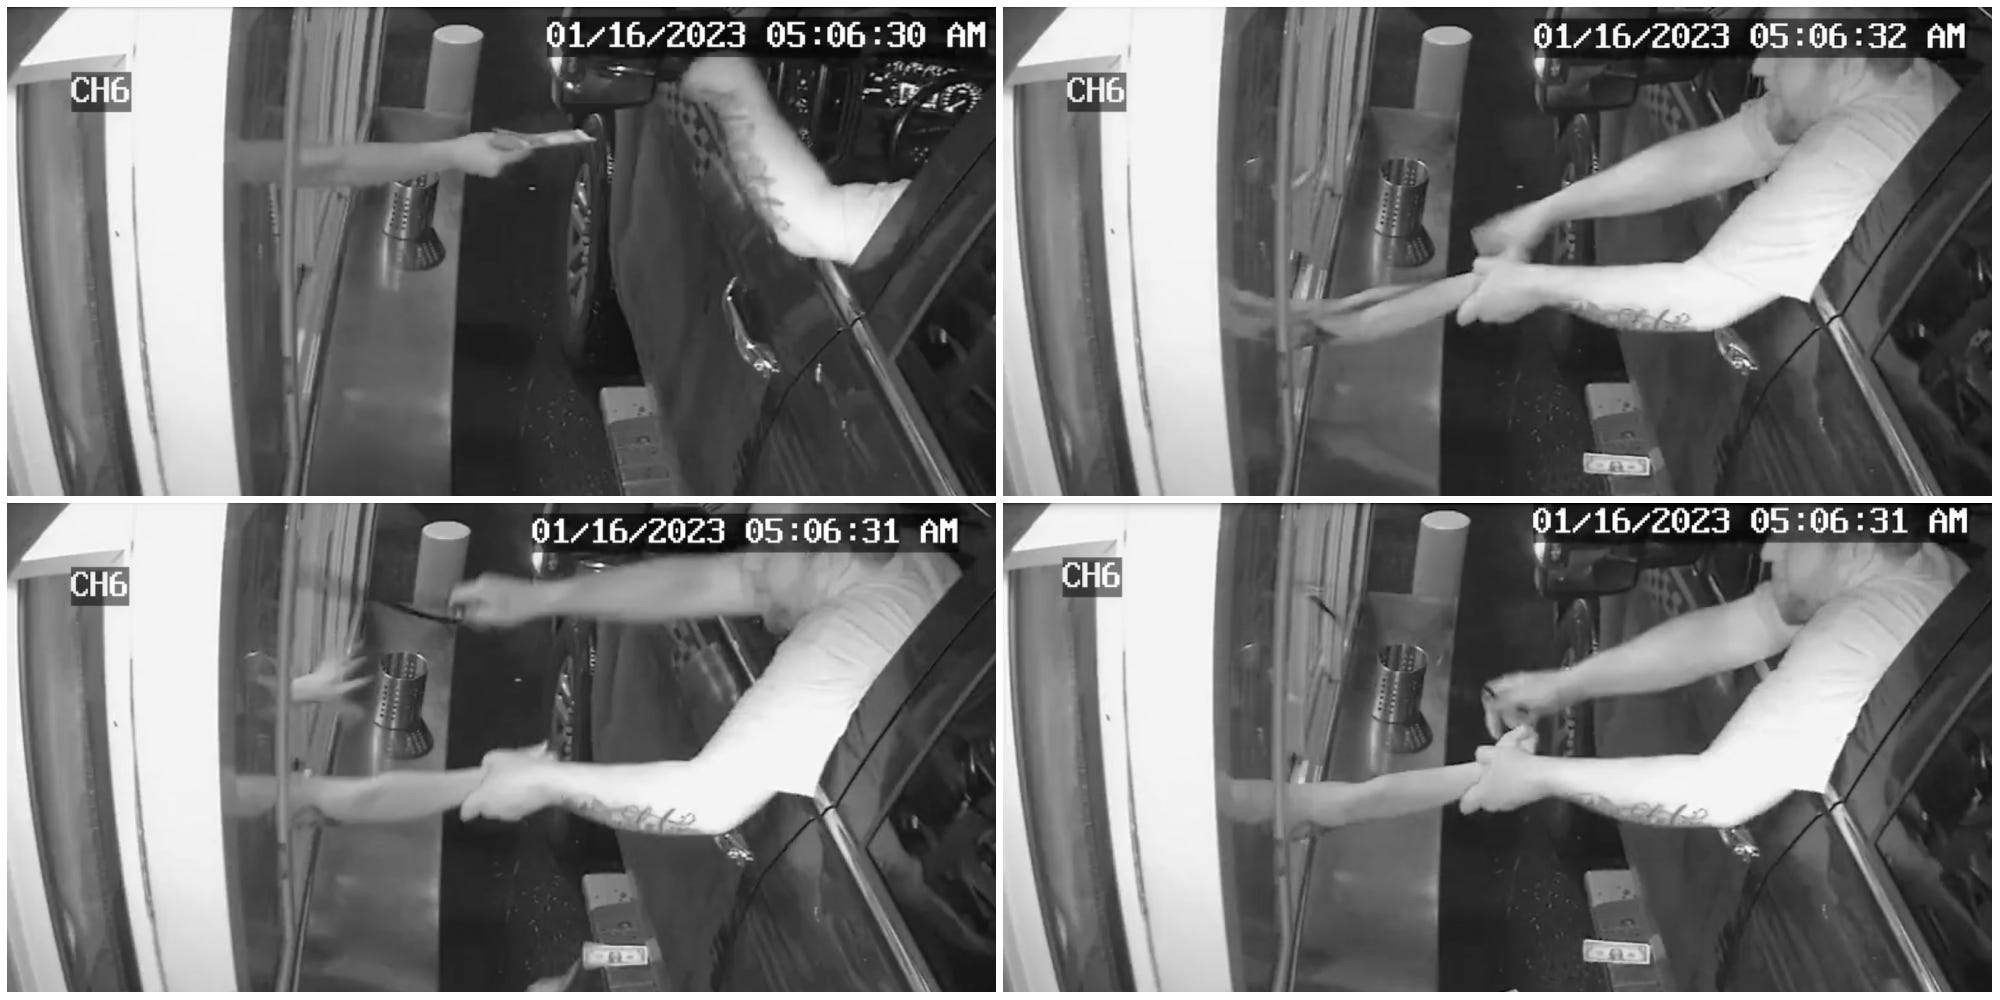 Bikini barista describes the moment a would-be kidnapper tried to